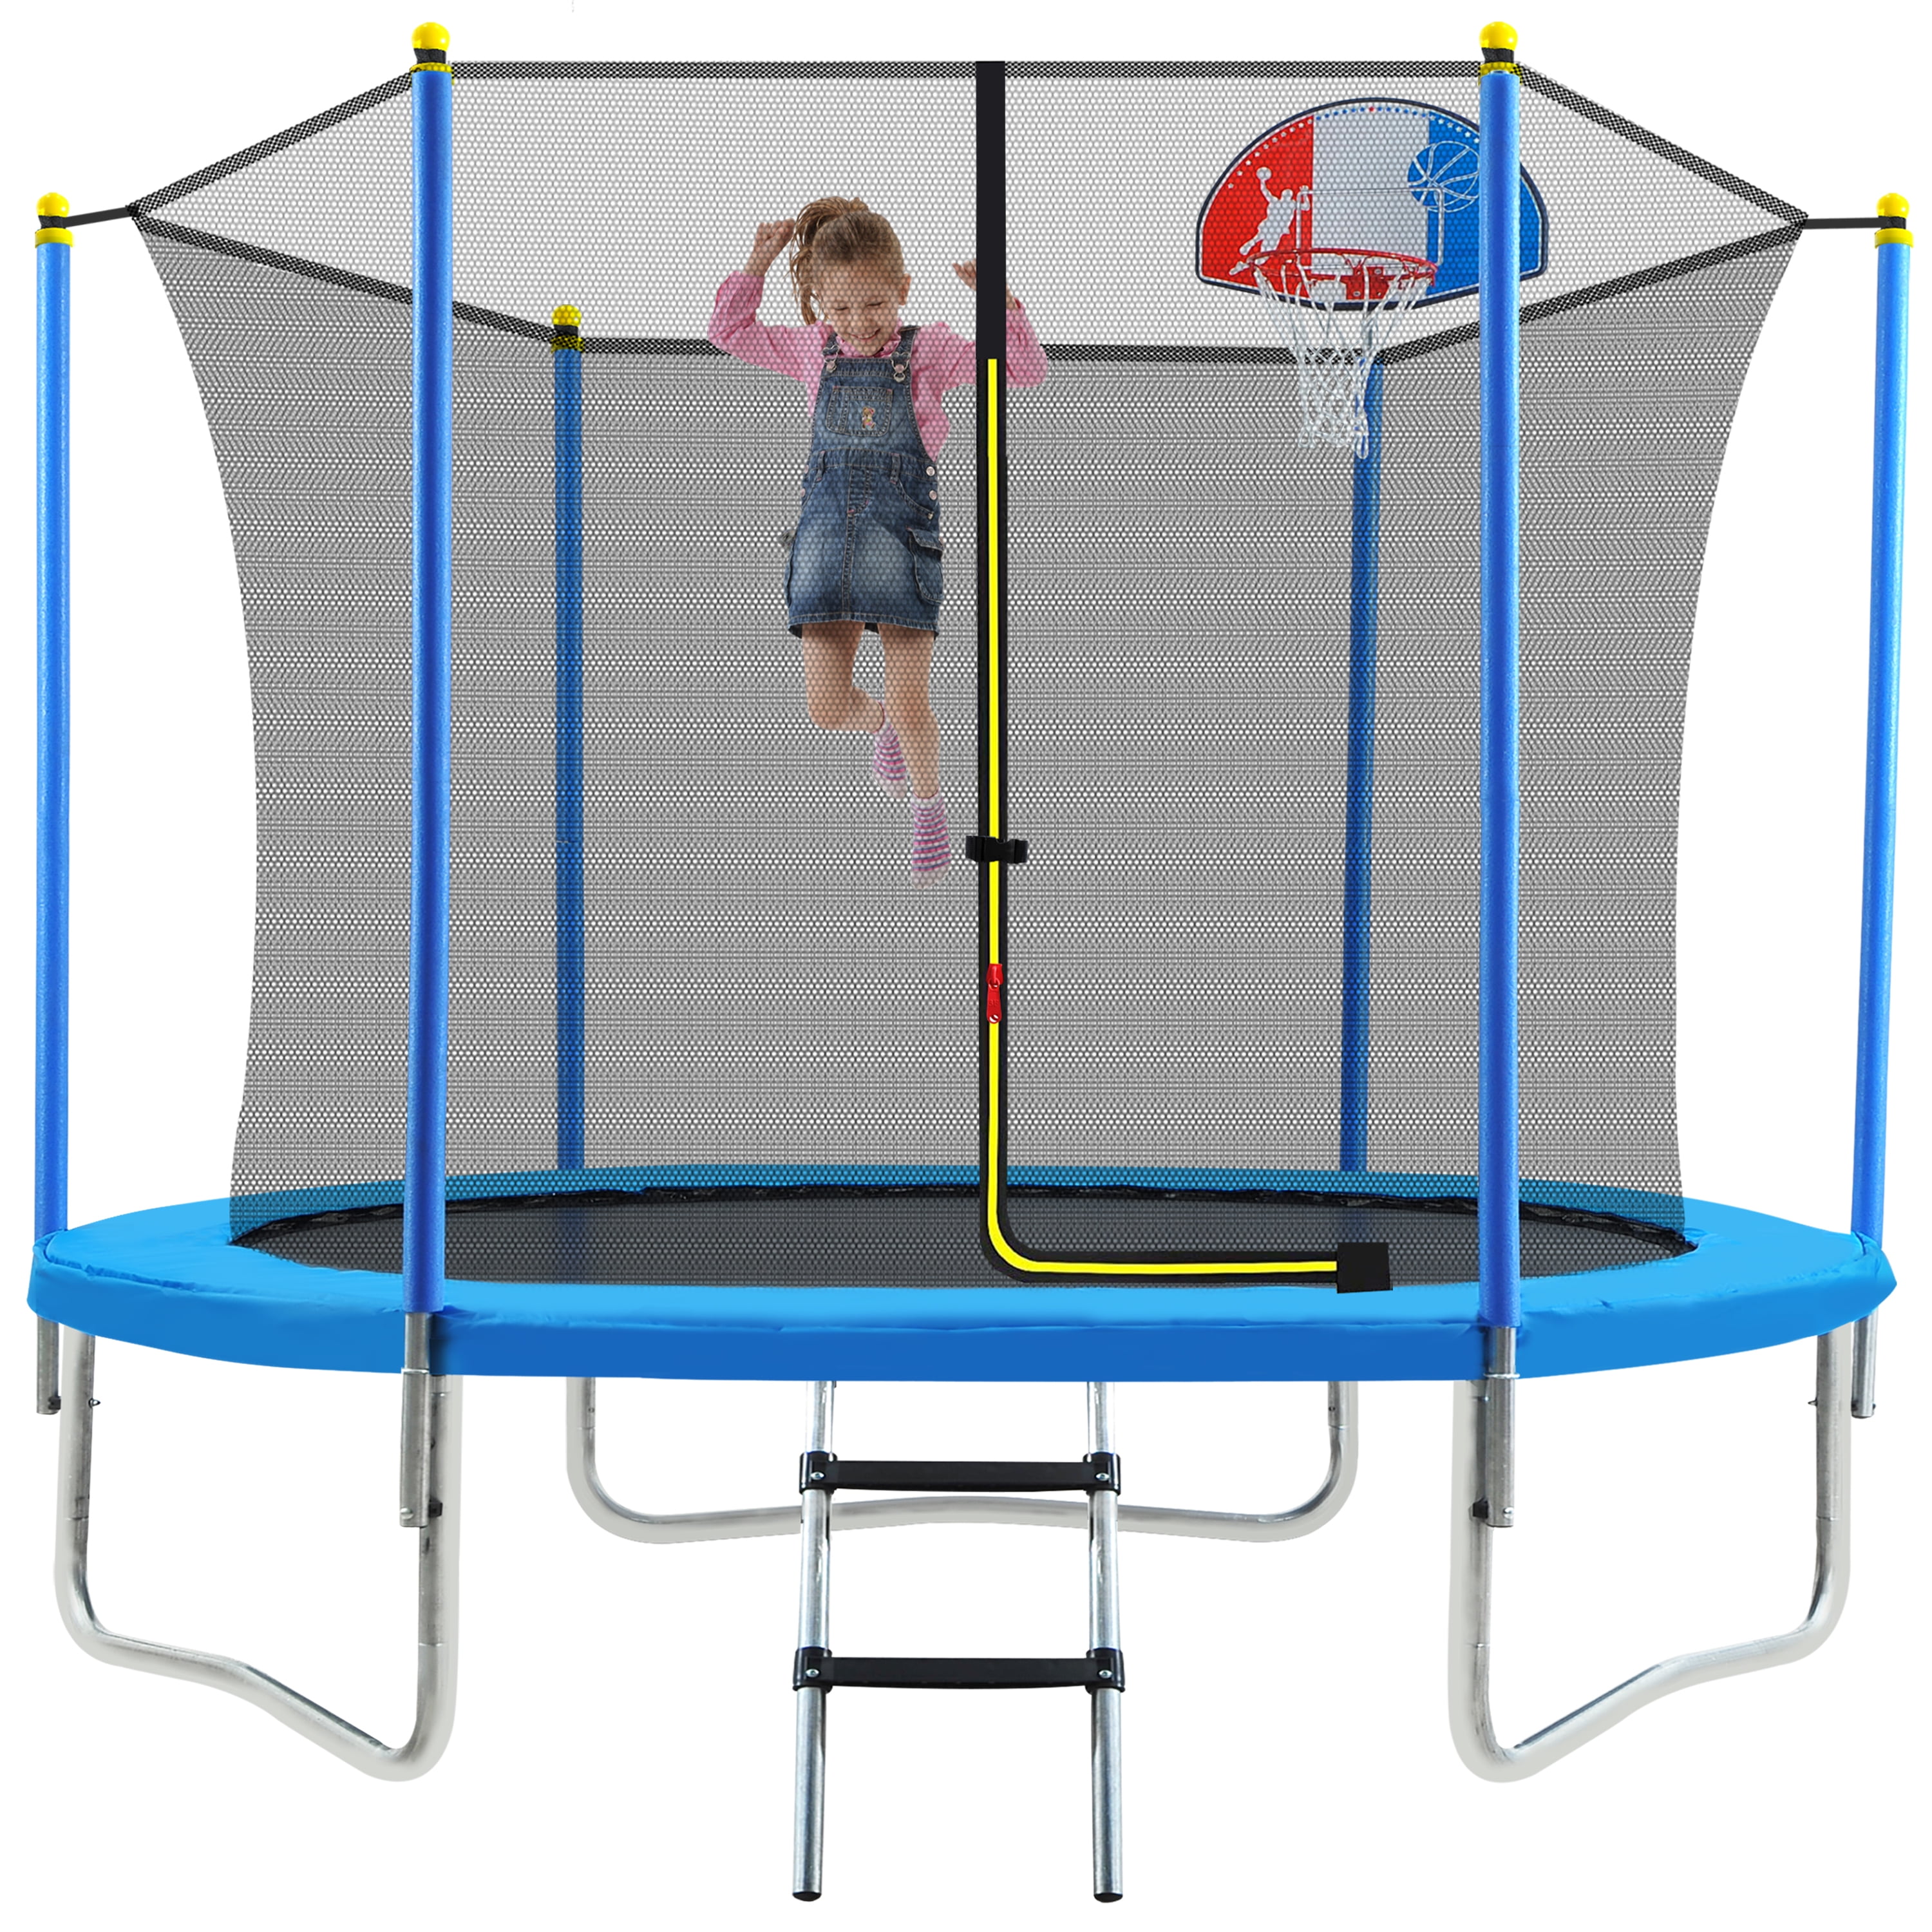 1000LBS 12 14 15 FT for Adults/Kids with Safety Enclosure Net Round Outdoor Recreational for Family Happy Time Basketball Hoop Waterproof Jump Mat and Ladder 